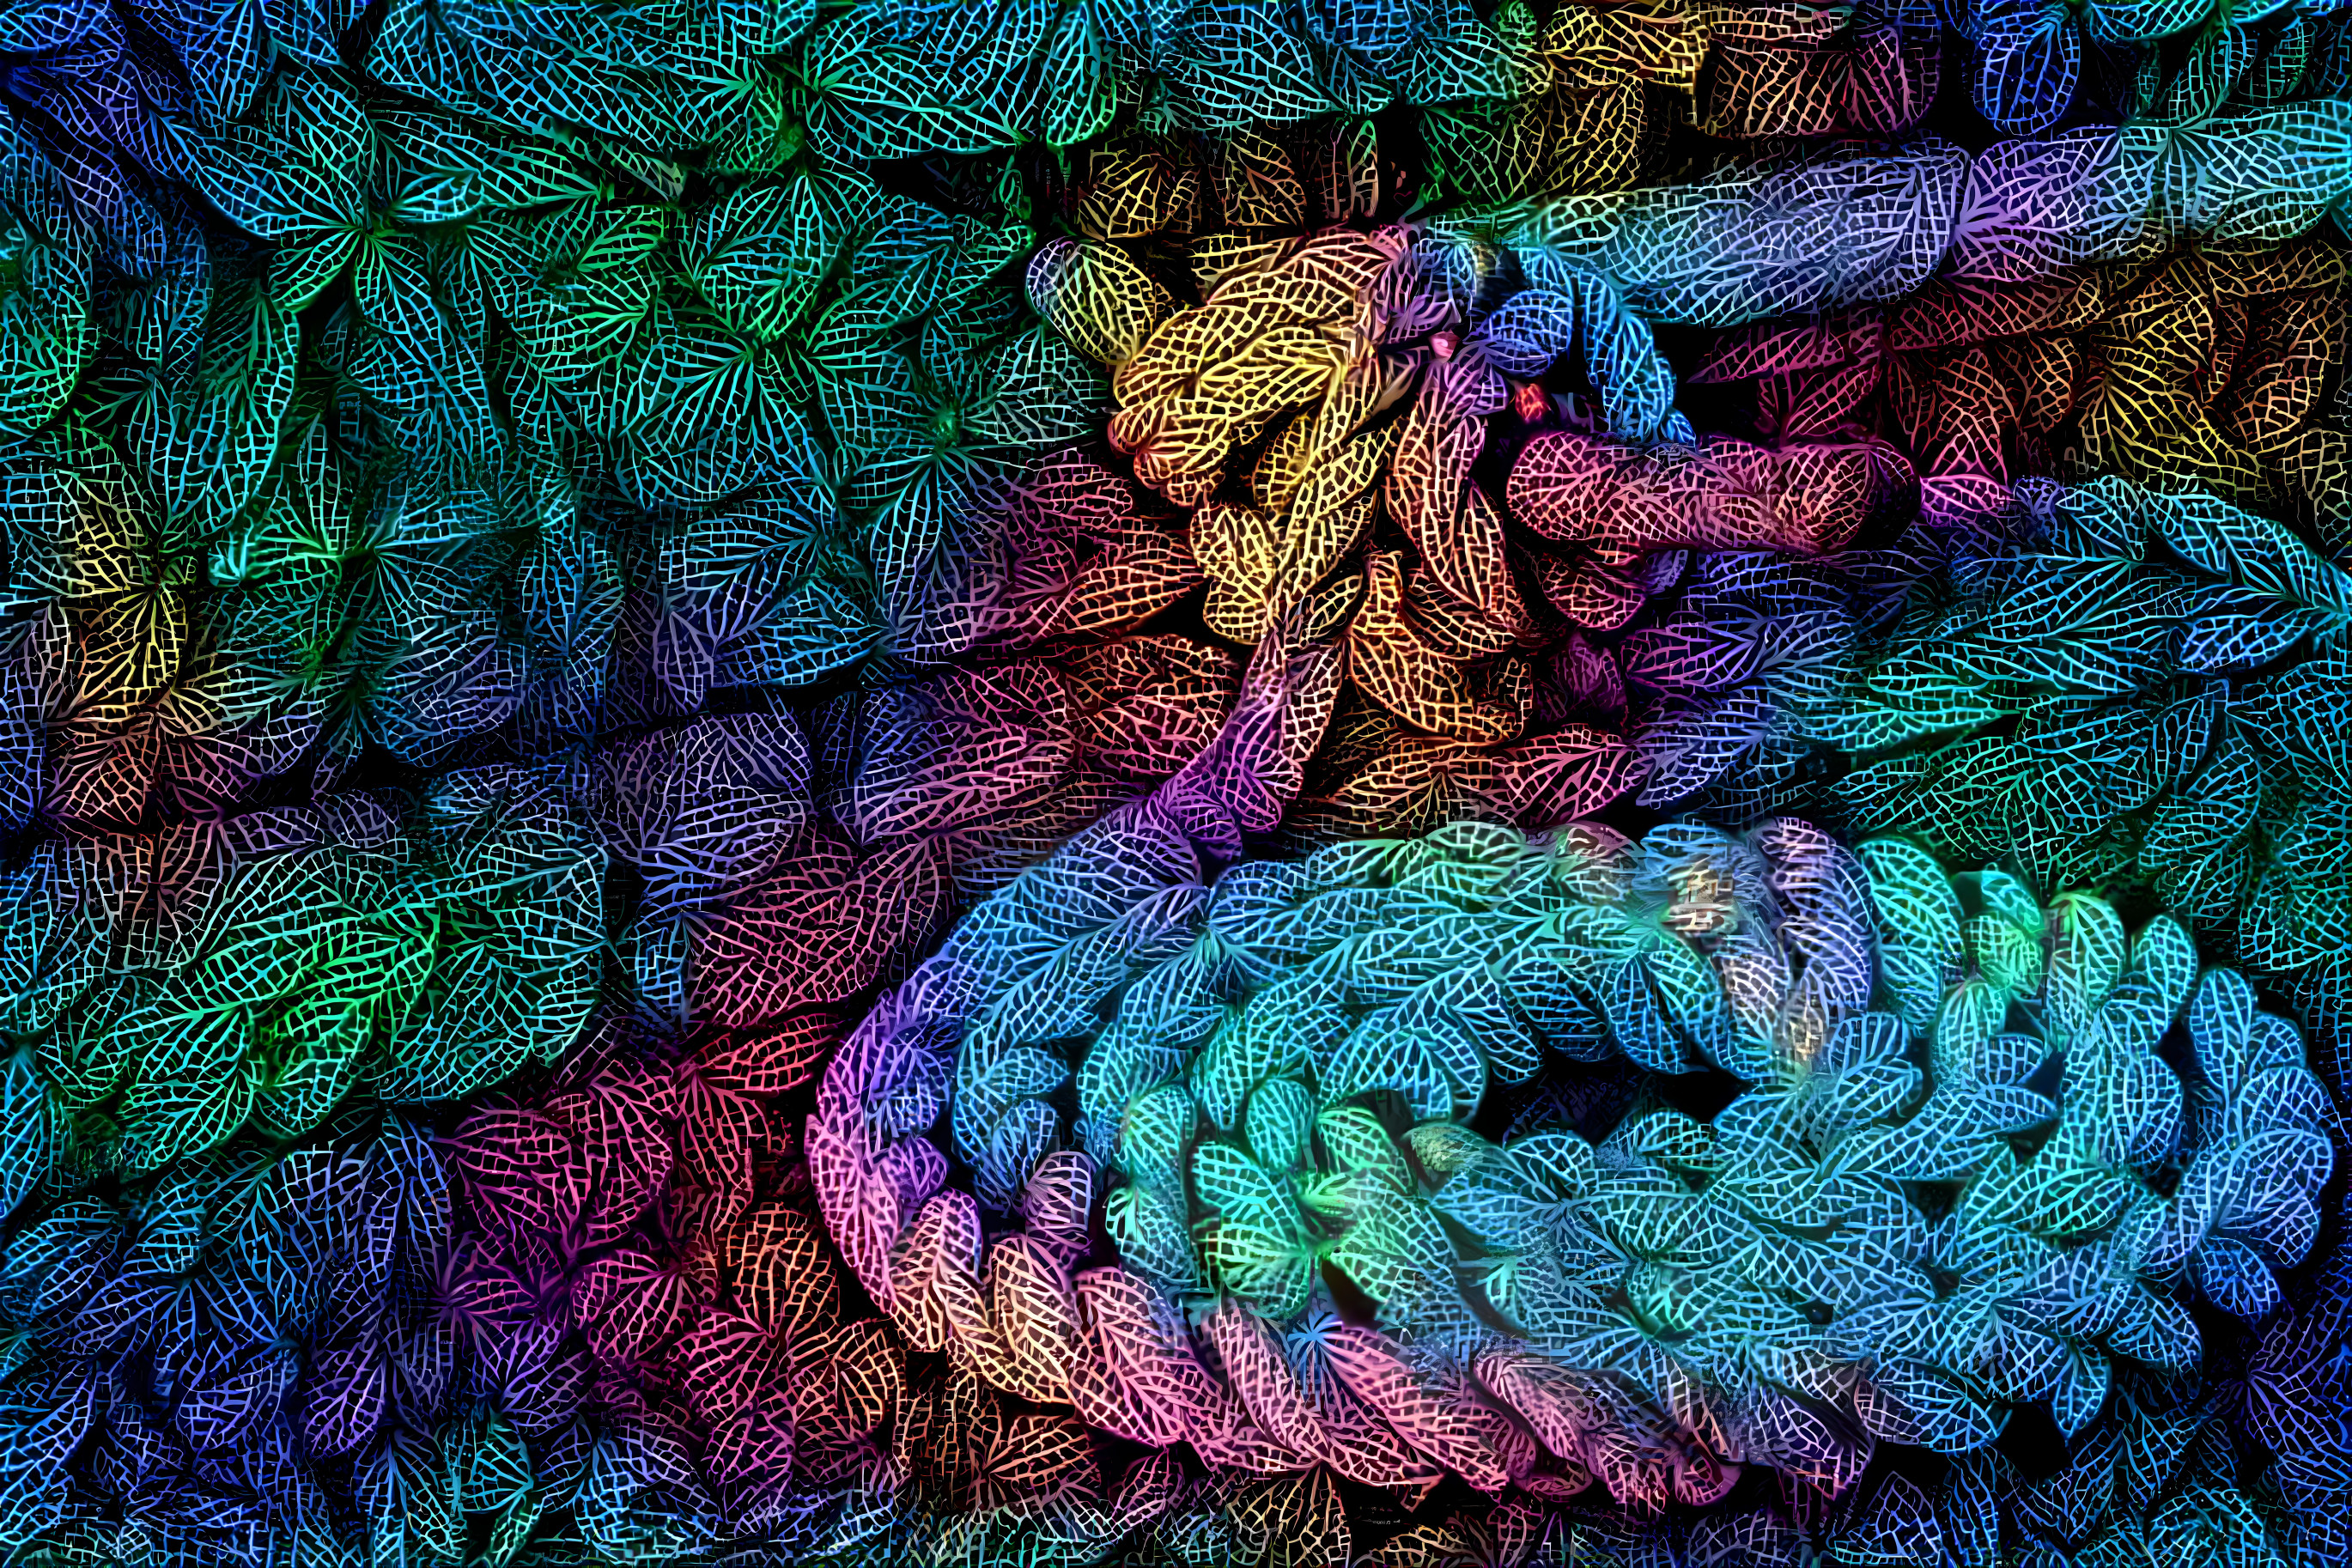 Nautical coil of rope 2